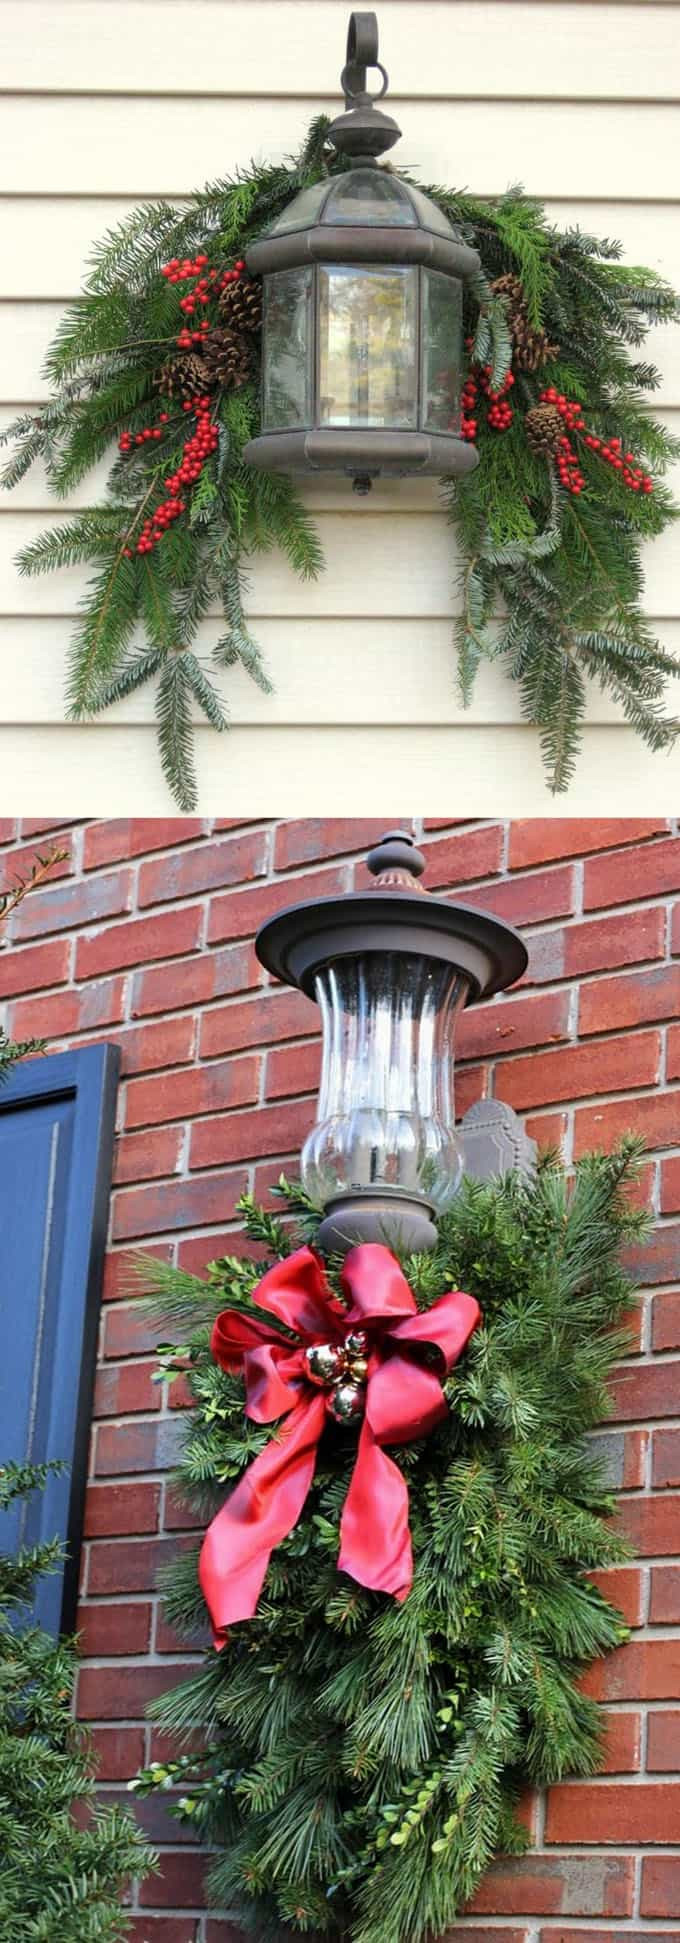 Simple Outdoor Christmas Decorations
 Gorgeous Outdoor Christmas Decorations 32 Best Ideas